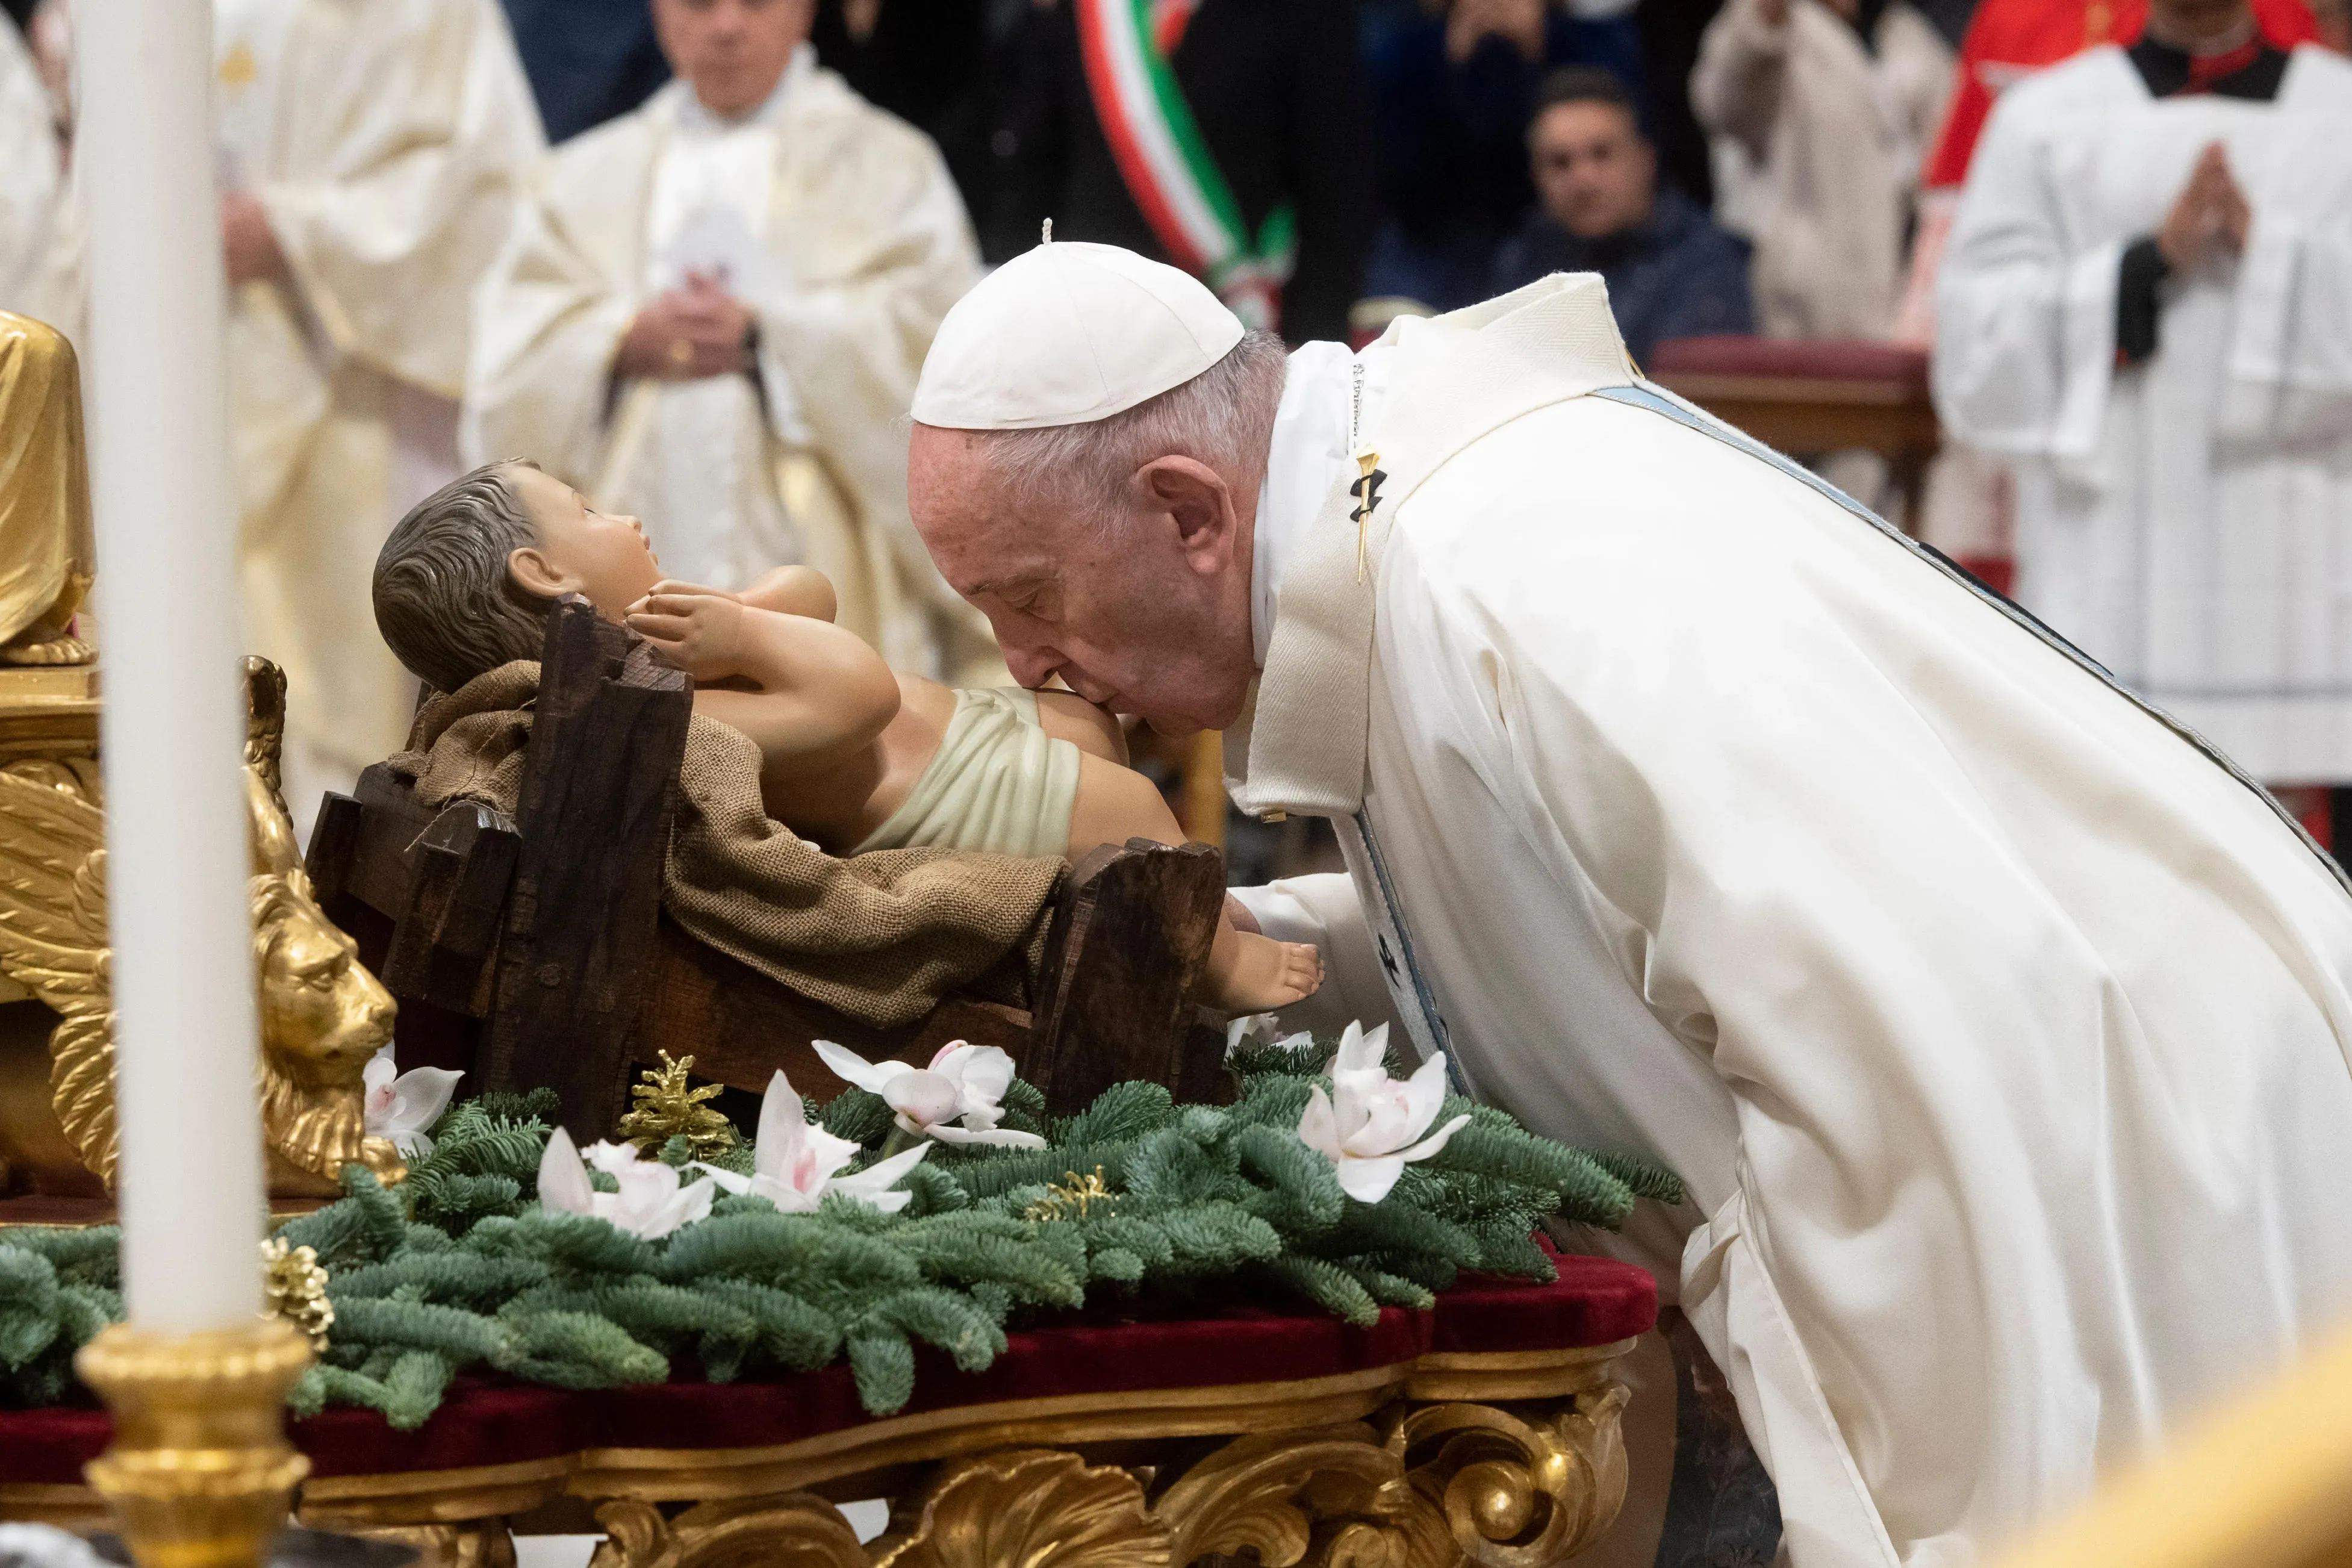 Pope Francis celebrates Mass on the Solemnity of Mary Mother of God on Jan. 1, 2020. Vatican Media